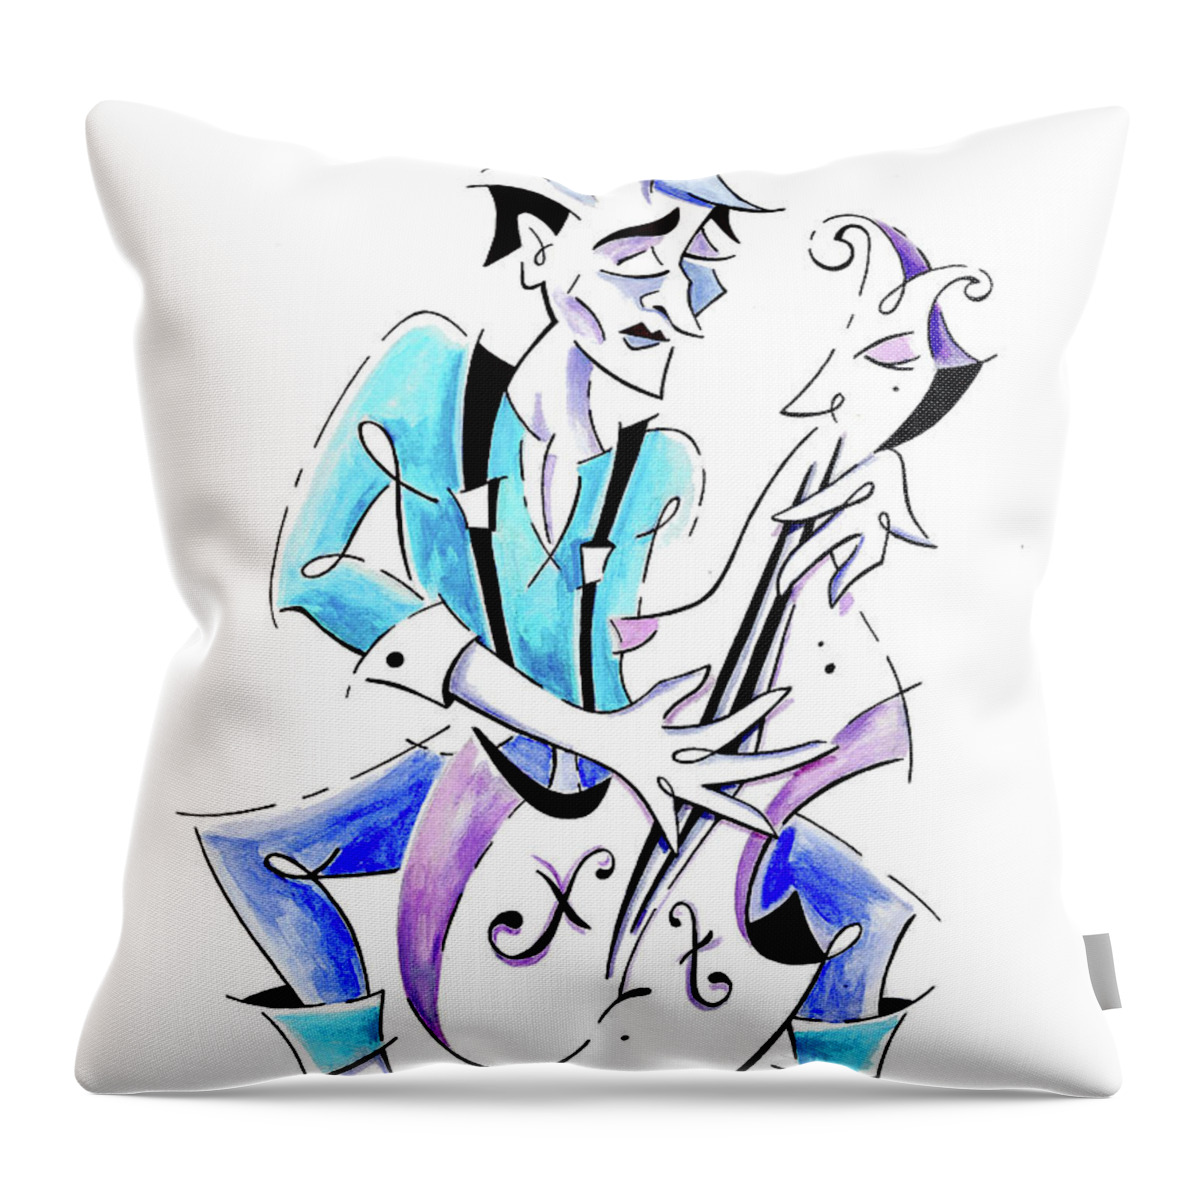 Violoncello Throw Pillow featuring the painting Street Musician Playing Violoncello Illustration by Arte Venezia